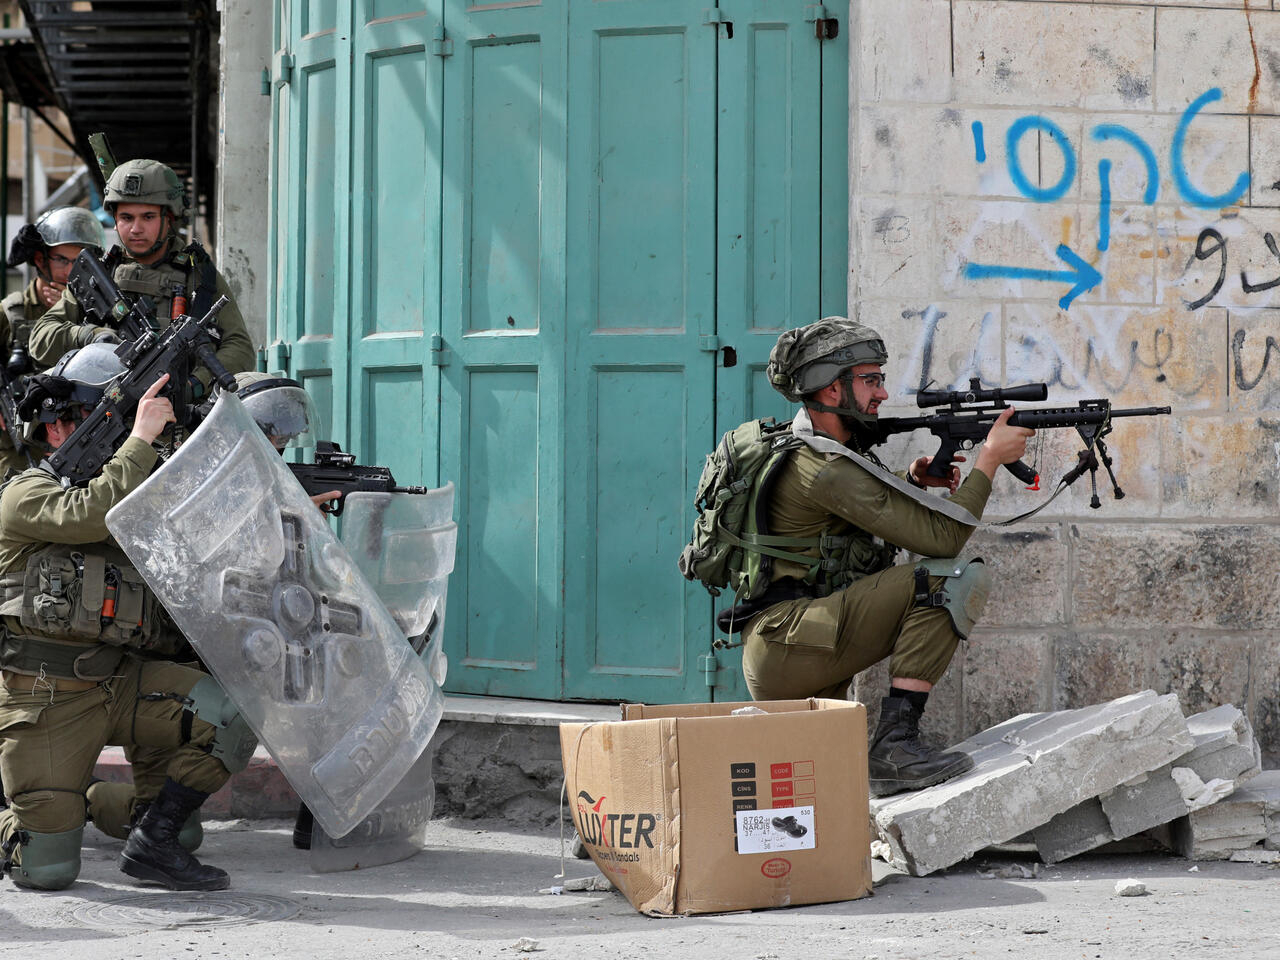 Palestinian killed in clashes with Israeli soldiers in West Bank